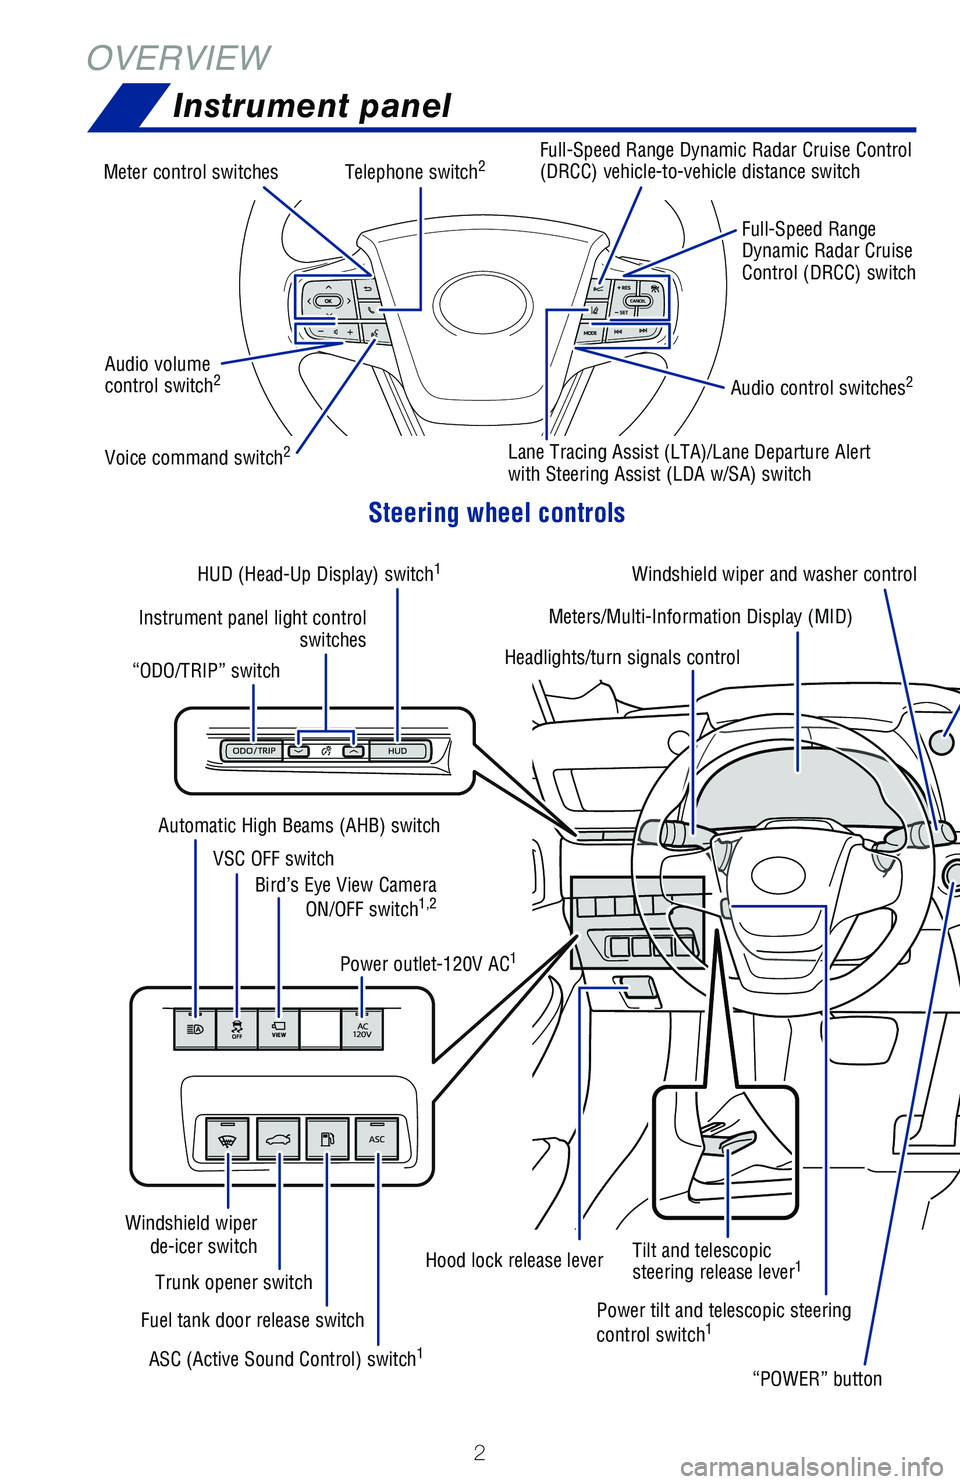 TOYOTA MIRAI 2021  Owners Manual (in English) 2
OVERVIEWInstrument panel
Steering wheel controls
Telephone switch2
Voice command switch2
Audio control switches2Audio volume 
control switch2
Full-Speed Range 
Dynamic Radar Cruise 
Control (DRCC) s